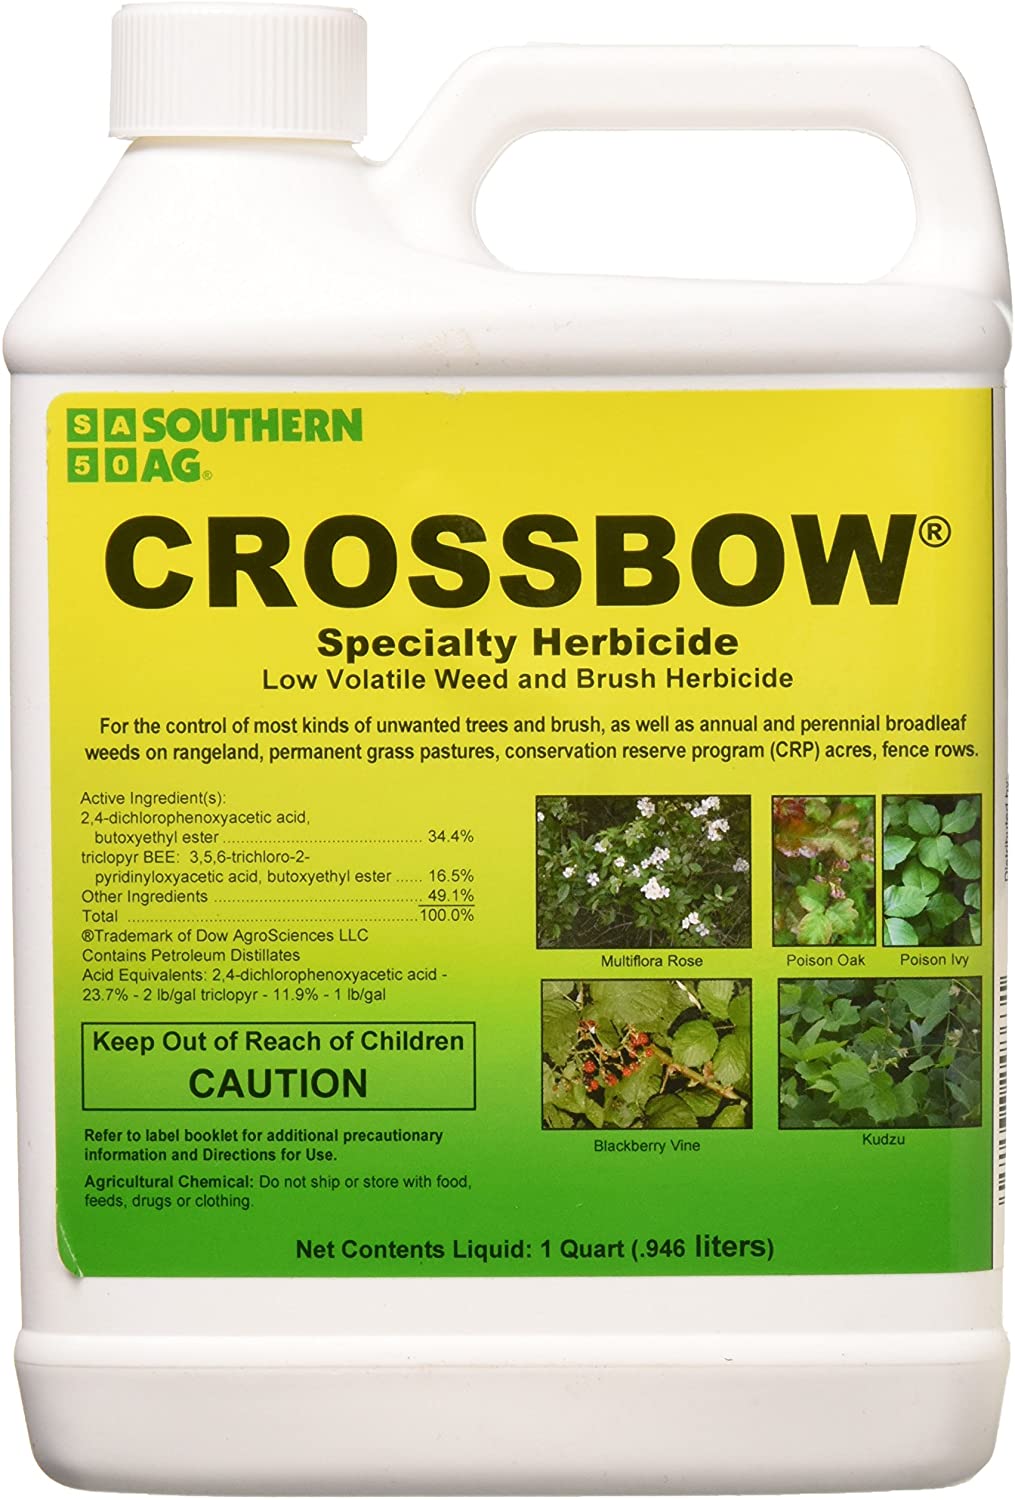 southern ag crossbow herbicide label